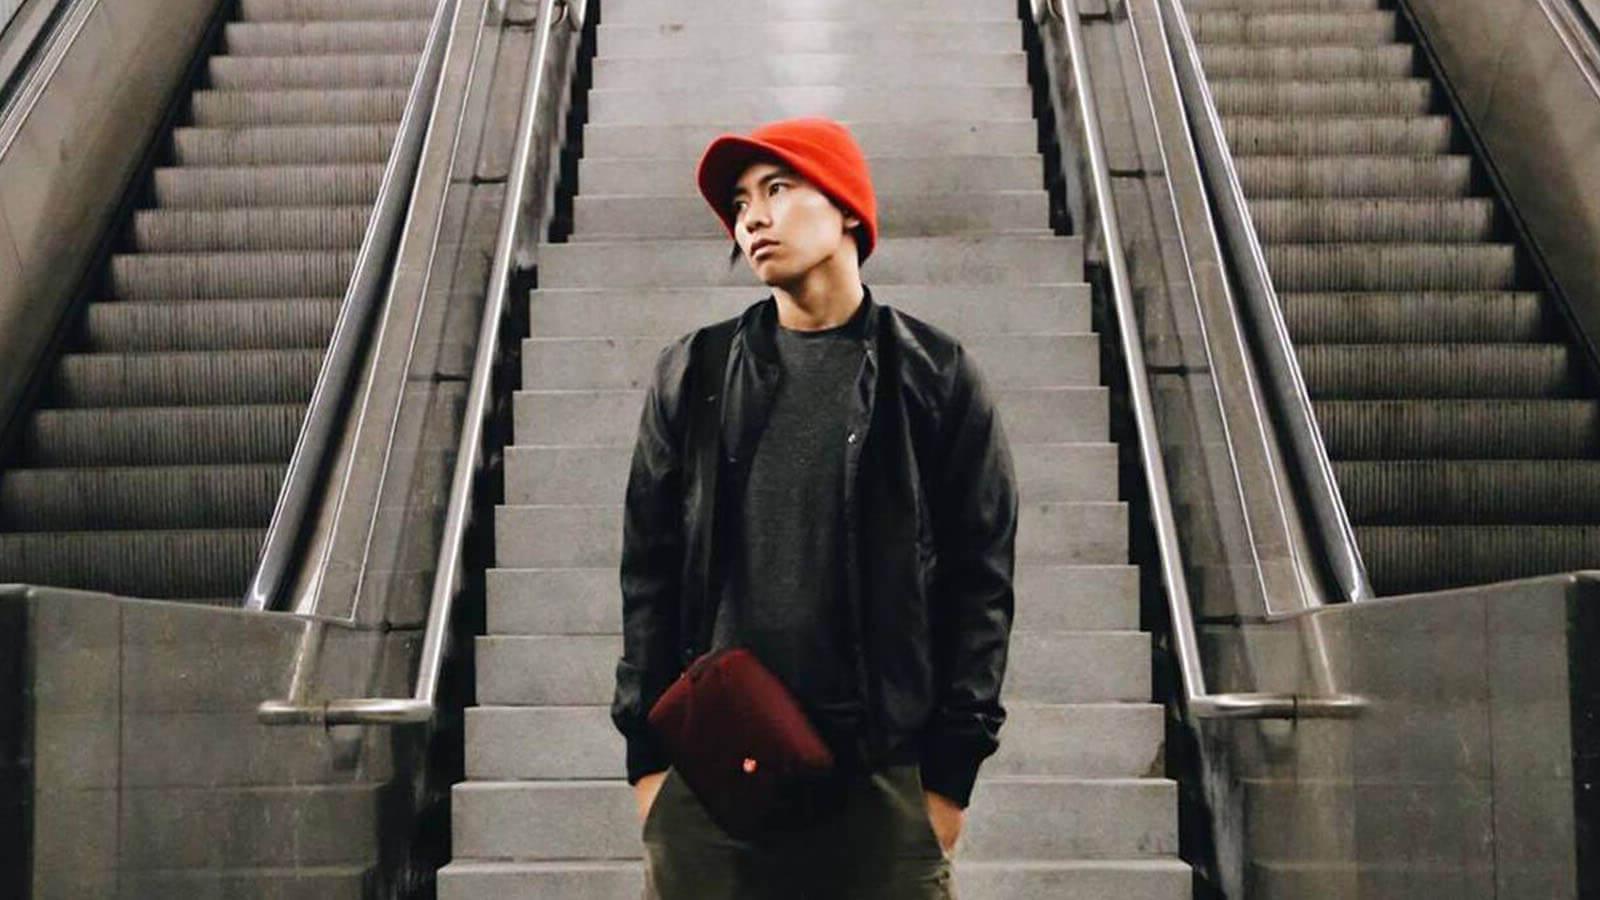 A young Asian man wearing a red knit cap, 黑色夹克和衬衫, 绿色的裤子, and a burgundy bag stands between two escalators. His hands are in his pockets and he is looking off to the left.